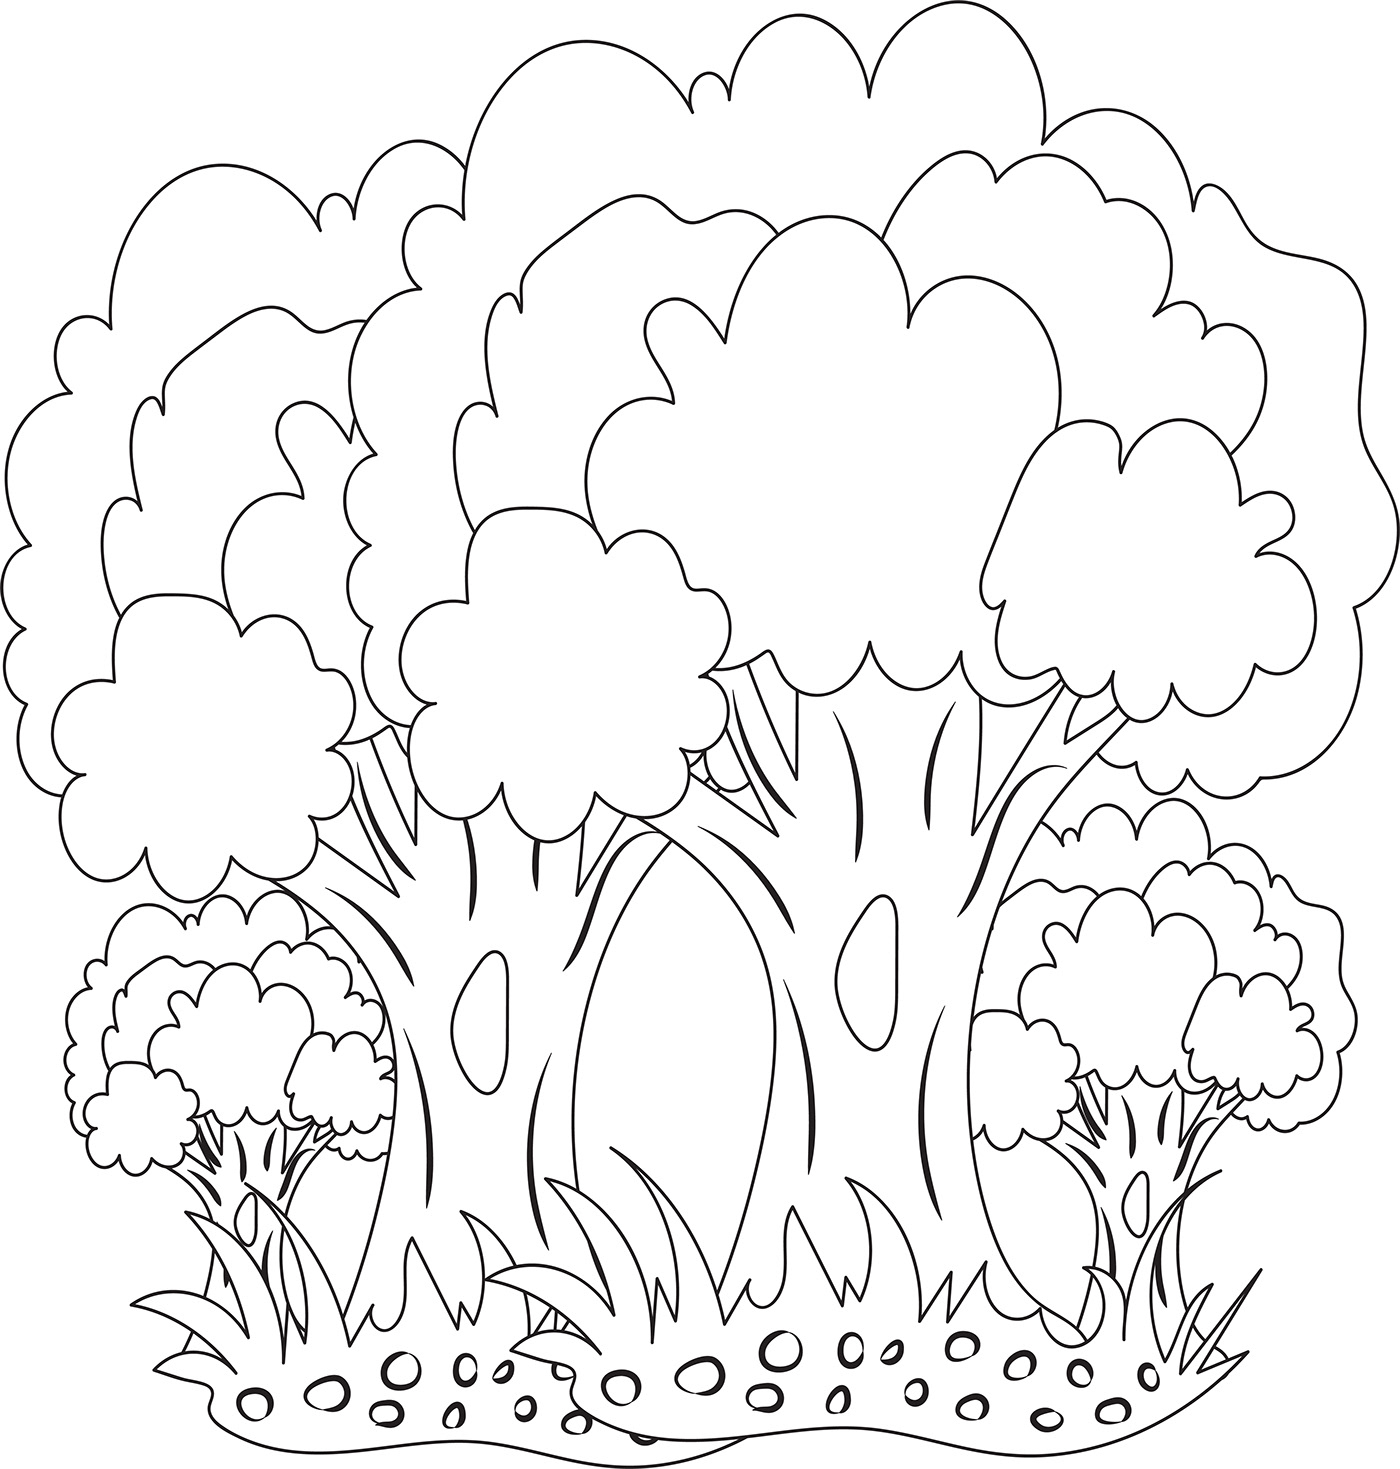 coloring page Digital Art  ILLUSTRATION  Tree  Flowers floral animal disign Adults kid's